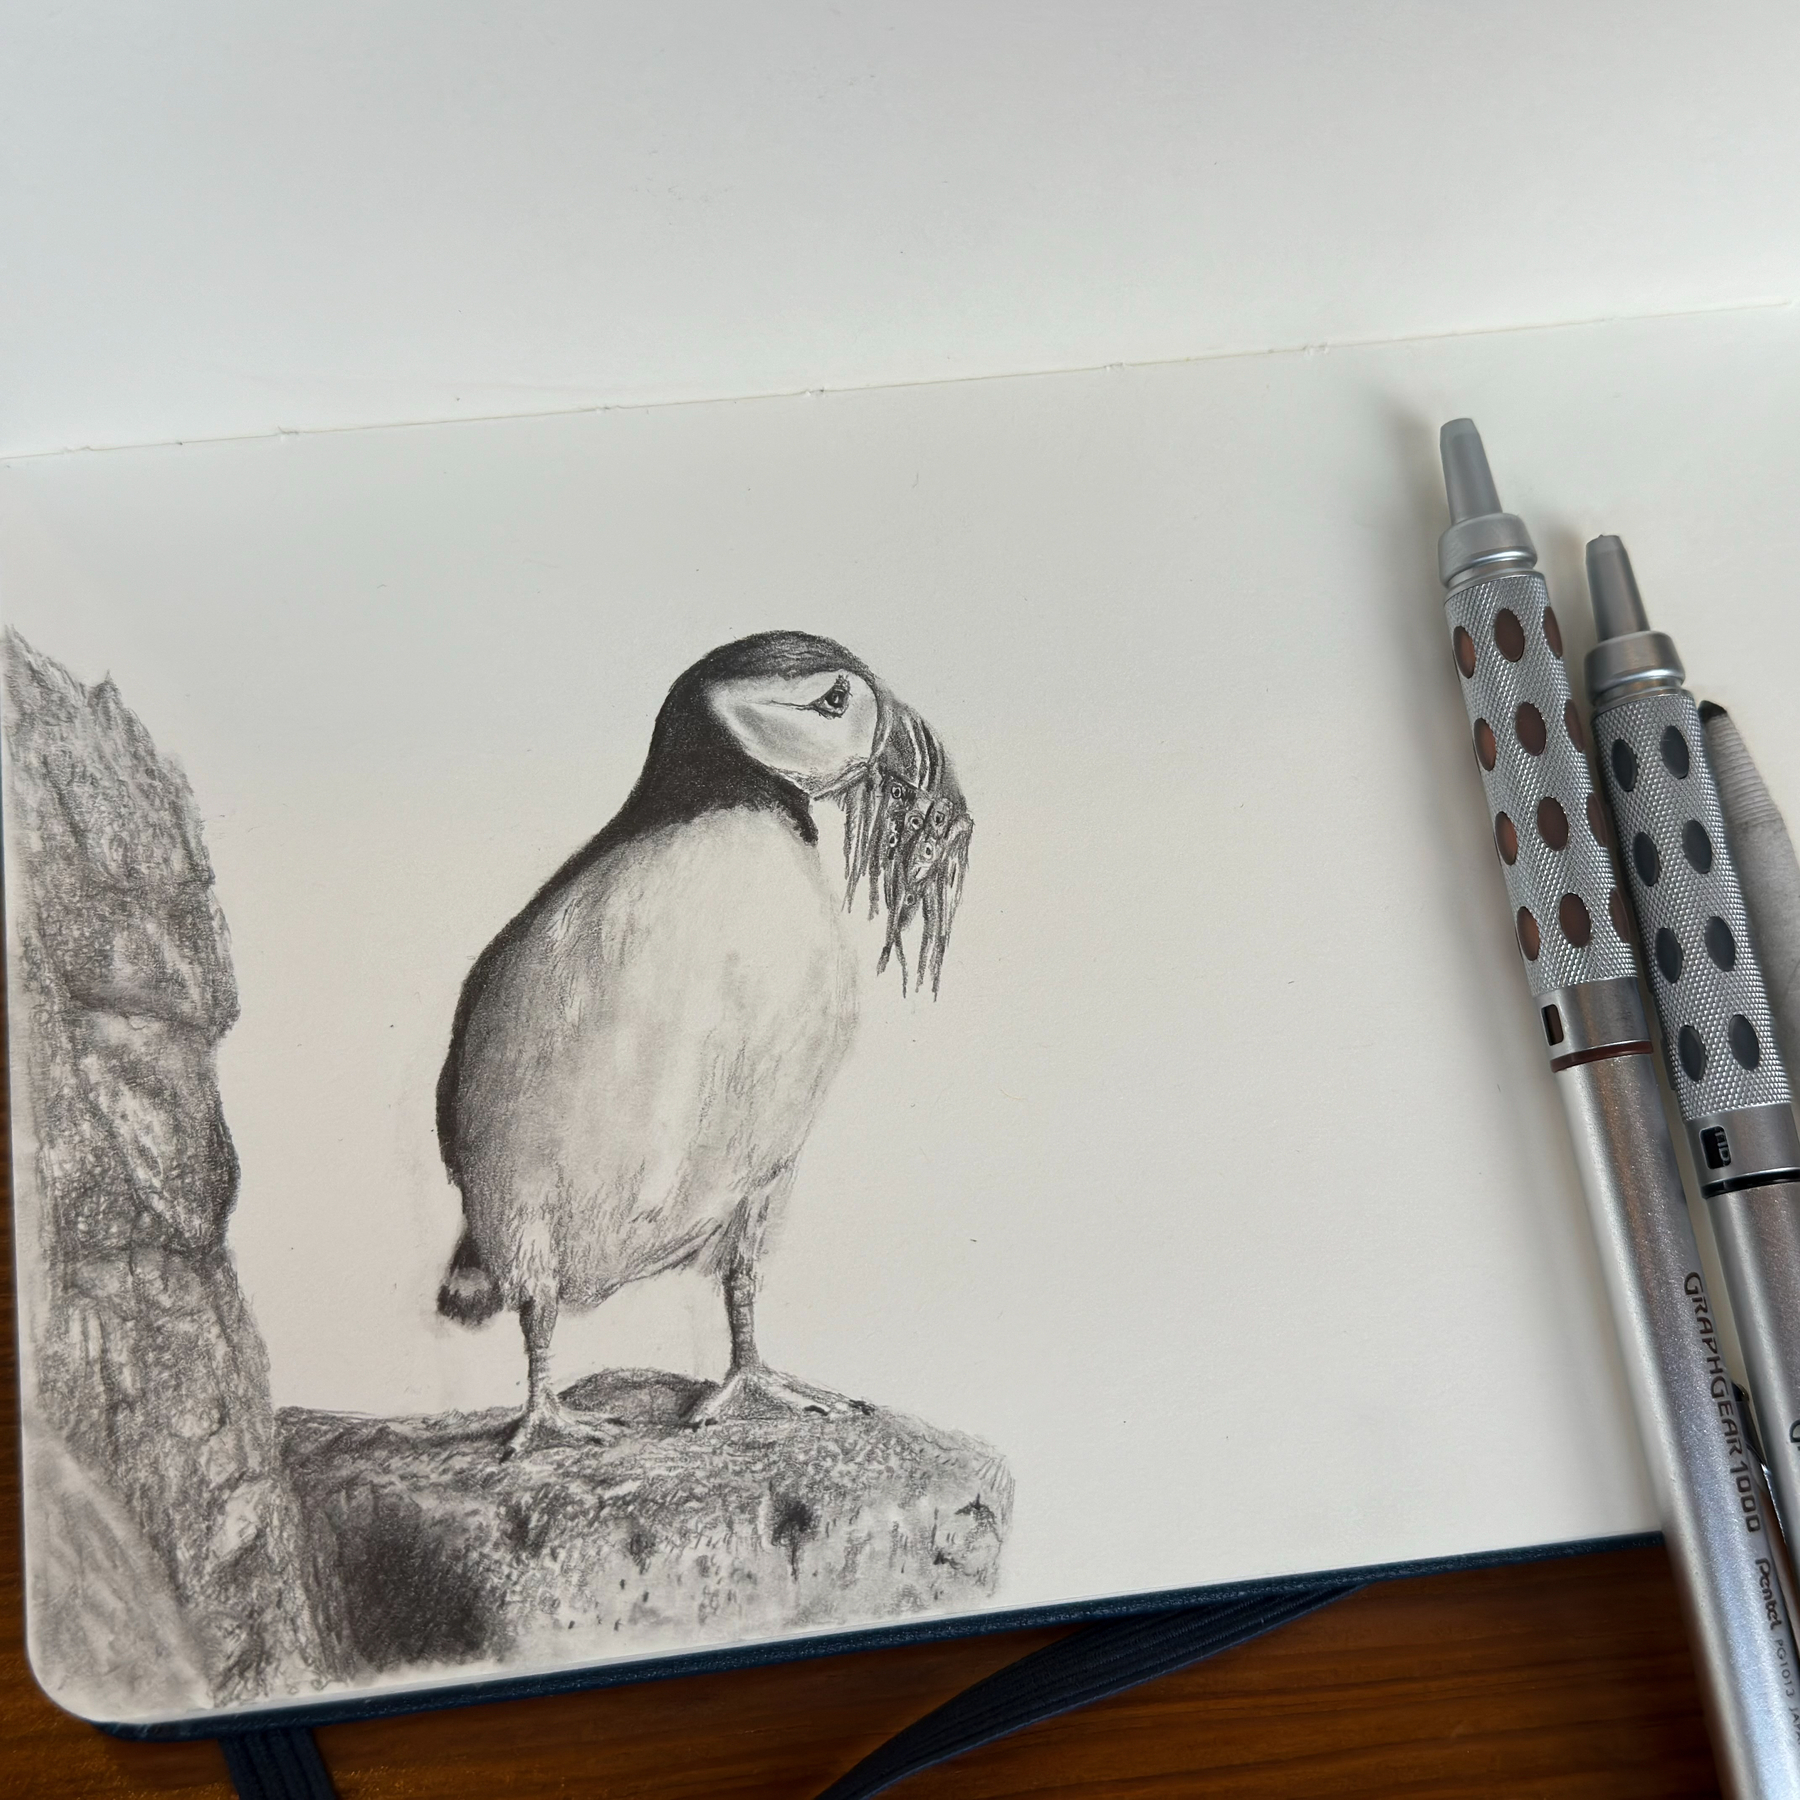 A pencil drawing of a puffin perched on a rock, with several fish in its beak, showcased on an open sketchbook next to two mechanical pencils on a wooden surface.